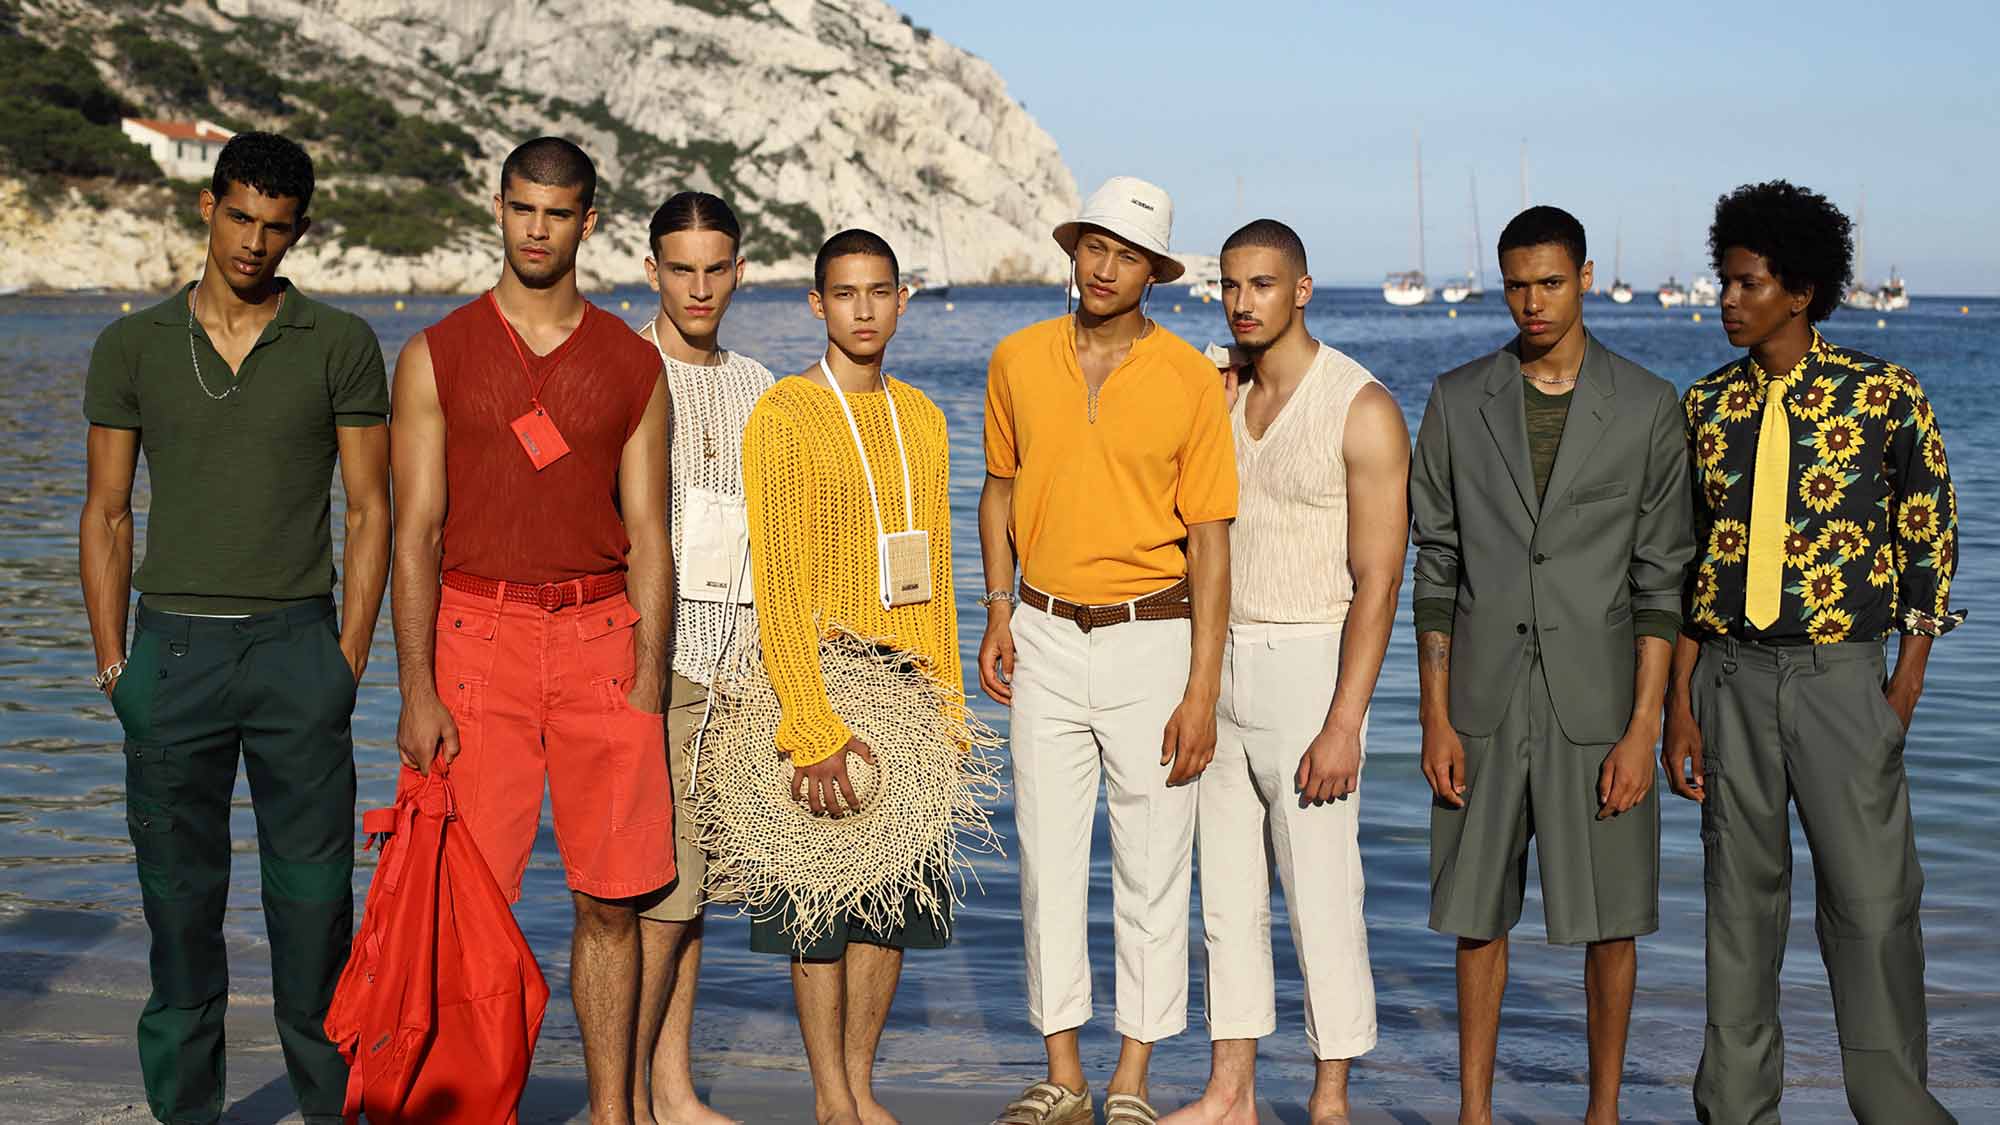 Jacquemus, Biography, Label, Collection